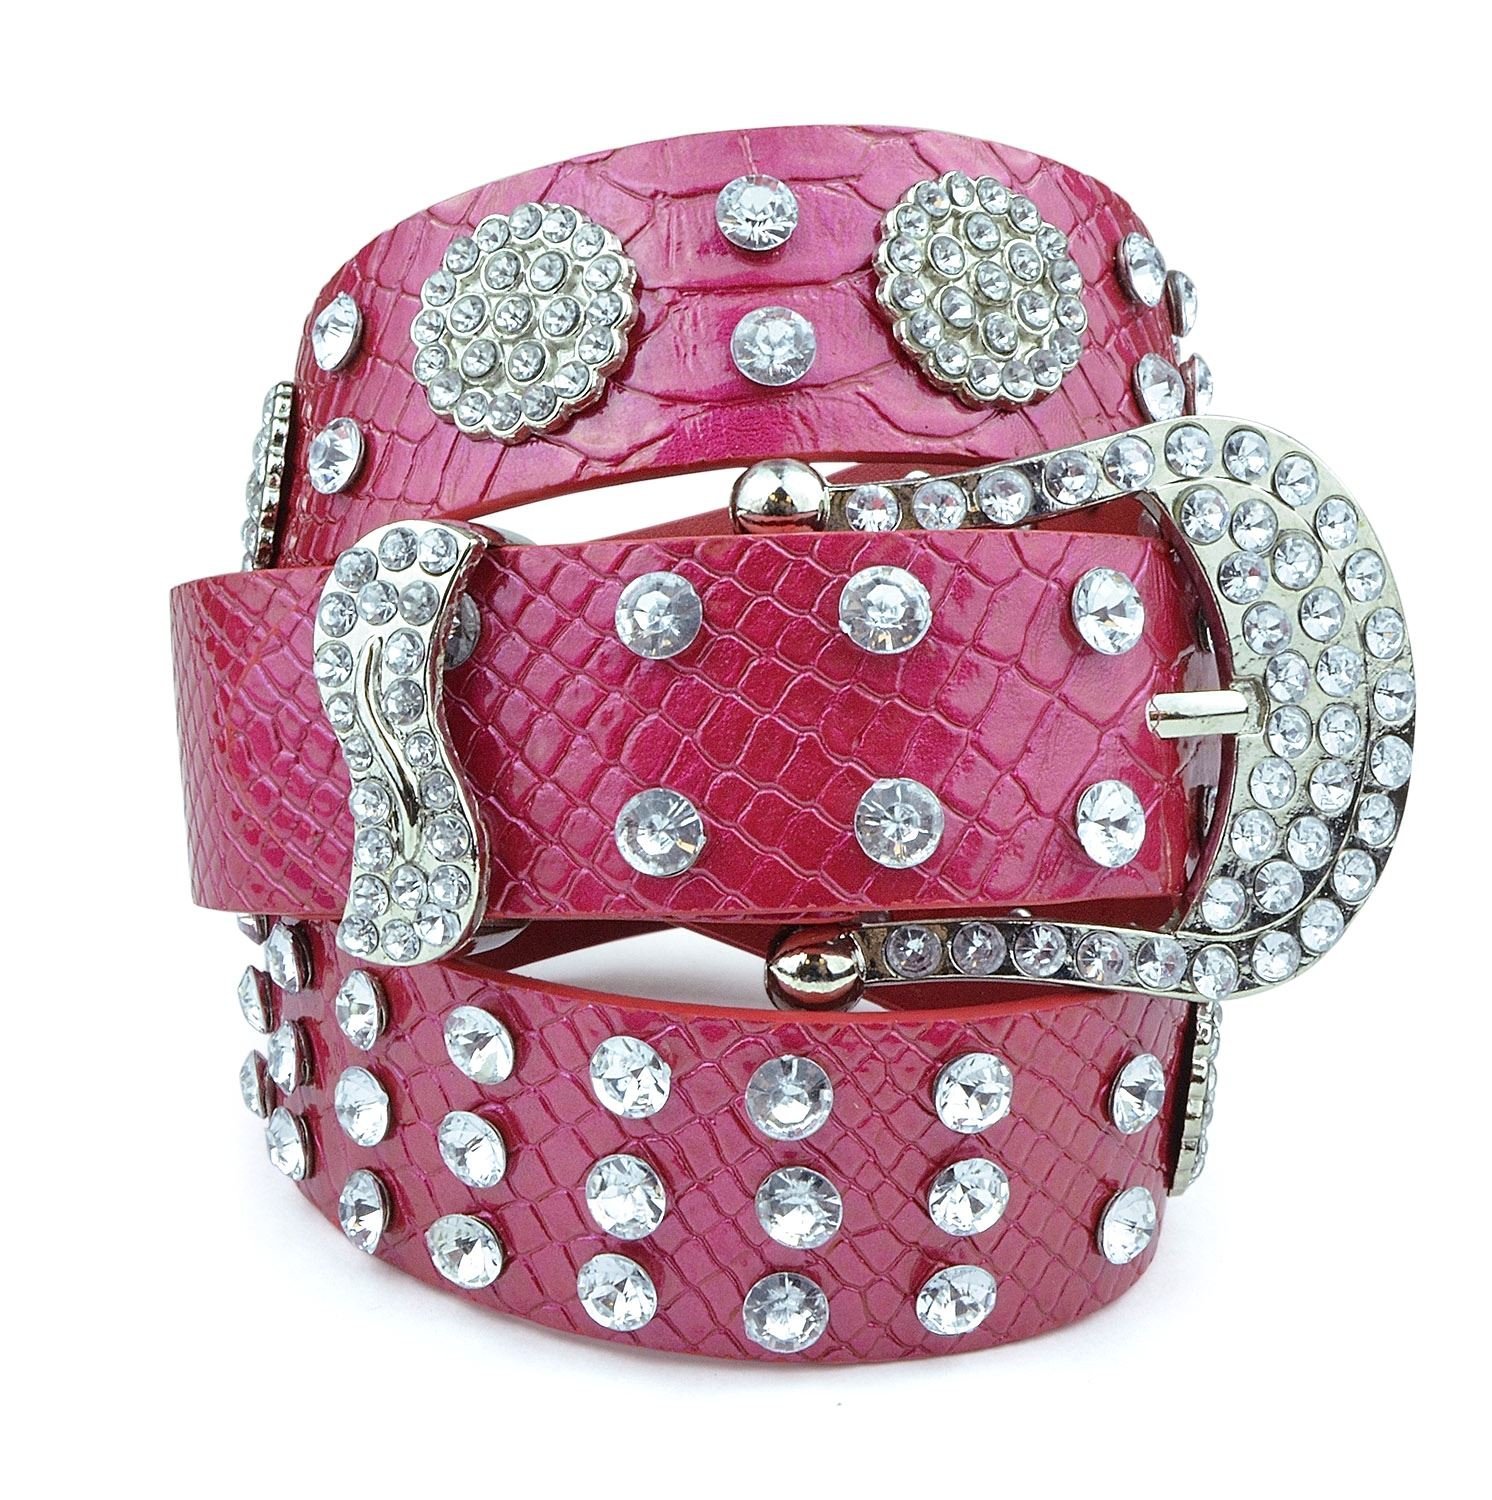 Womens Studded Belts - Multiple Colors & Designs - Western Cowgirl PU Leather Rhinestone Belt with Bling Buckles by Belle Donne - Red-IV